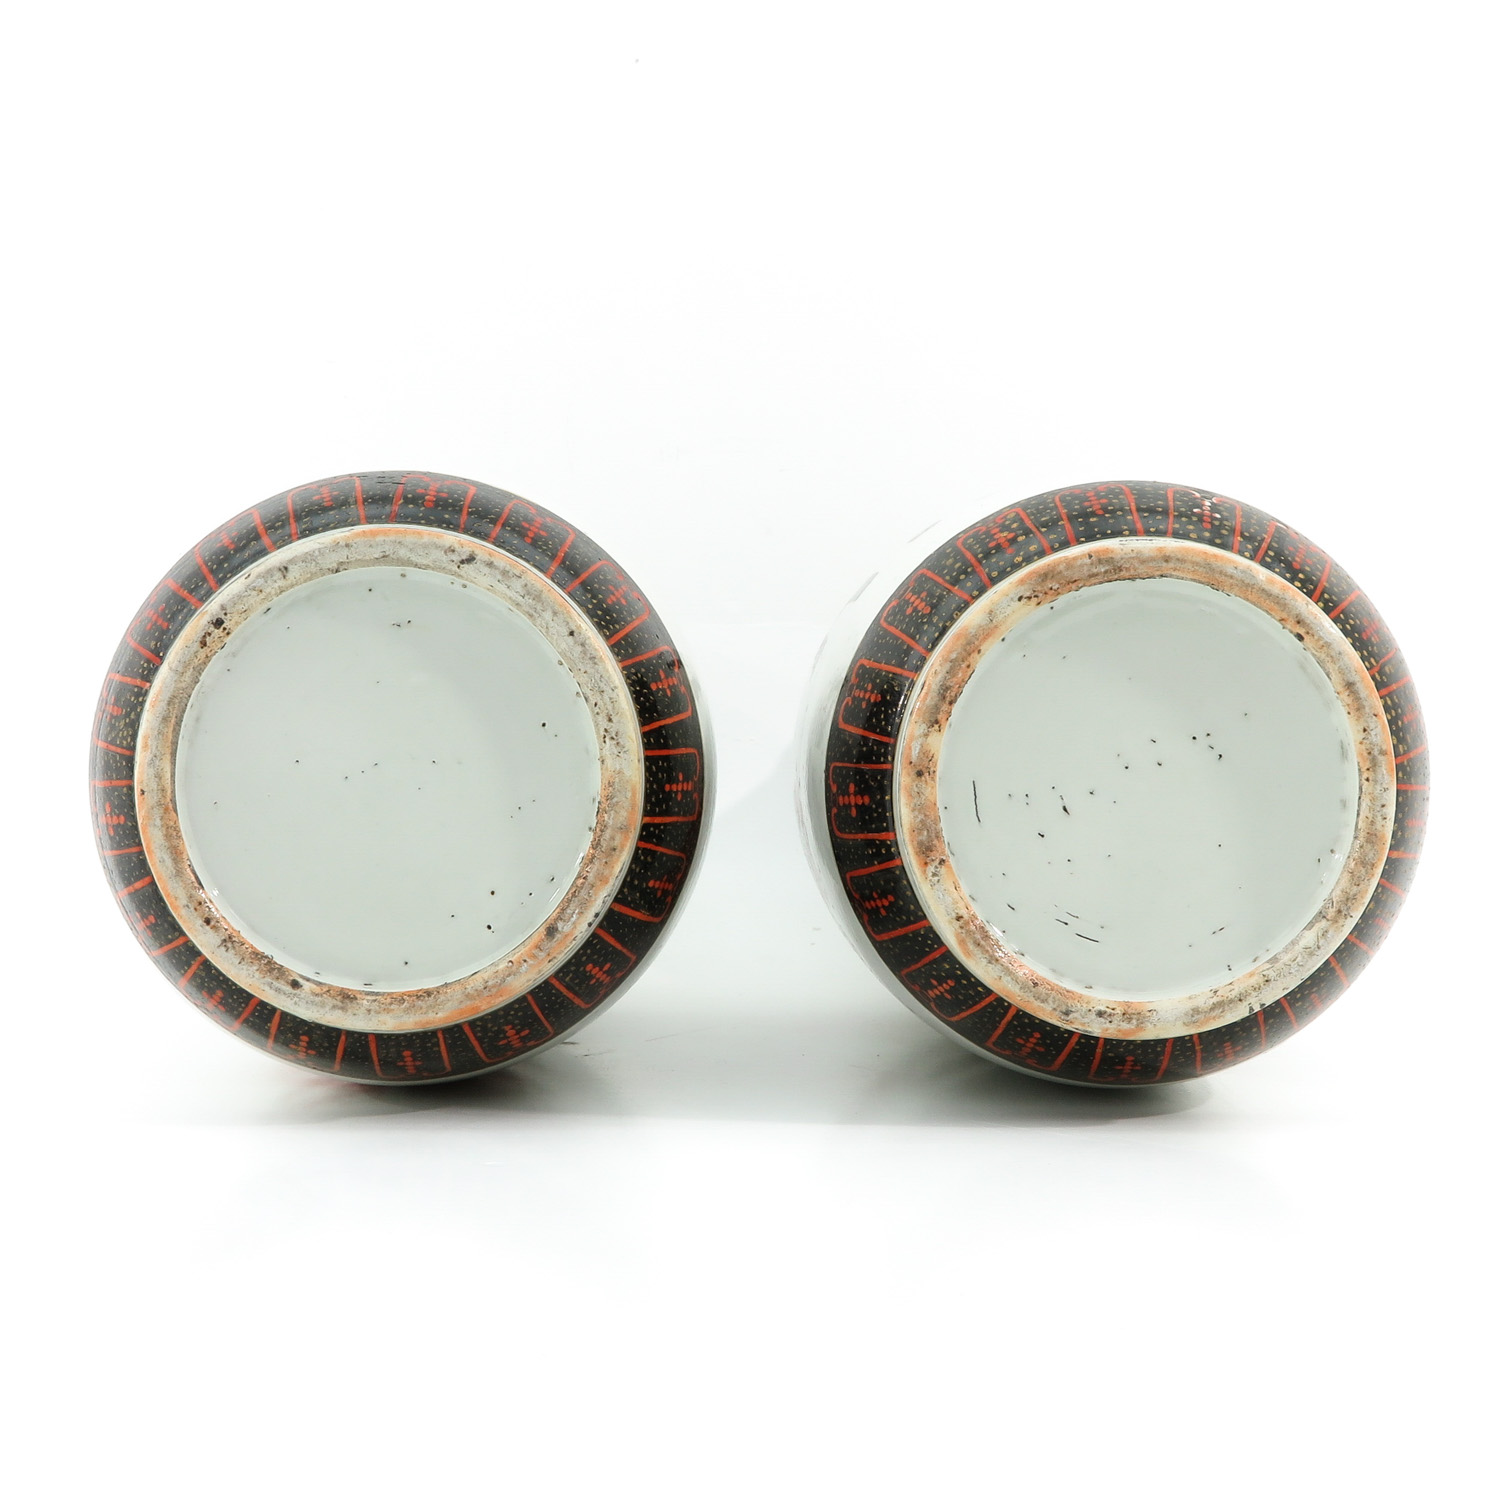 A Pair of Polychrome Decor Vases - Image 6 of 10